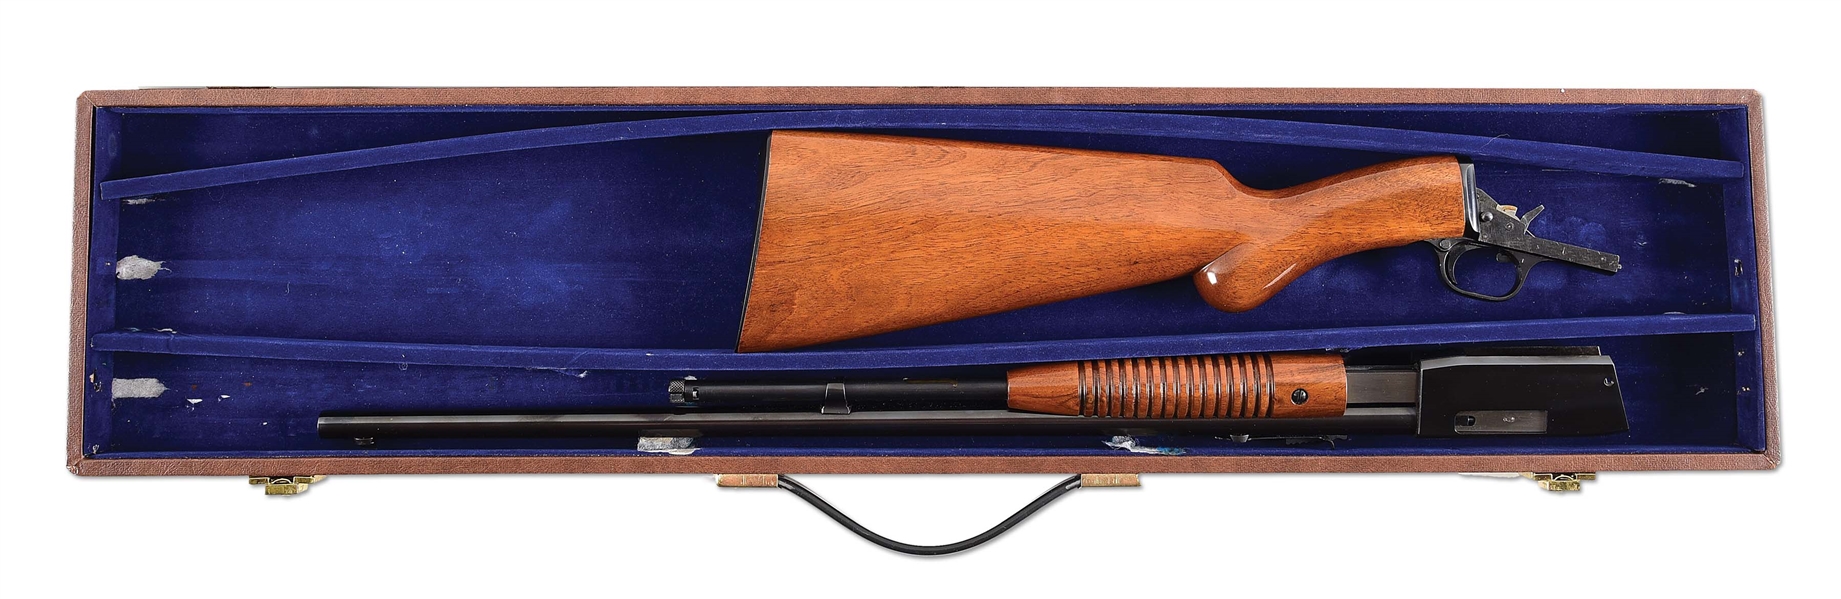 (C) BROWNING TROMBONE .22 LR SLIDE ACTION RIFLE WITH CASE.